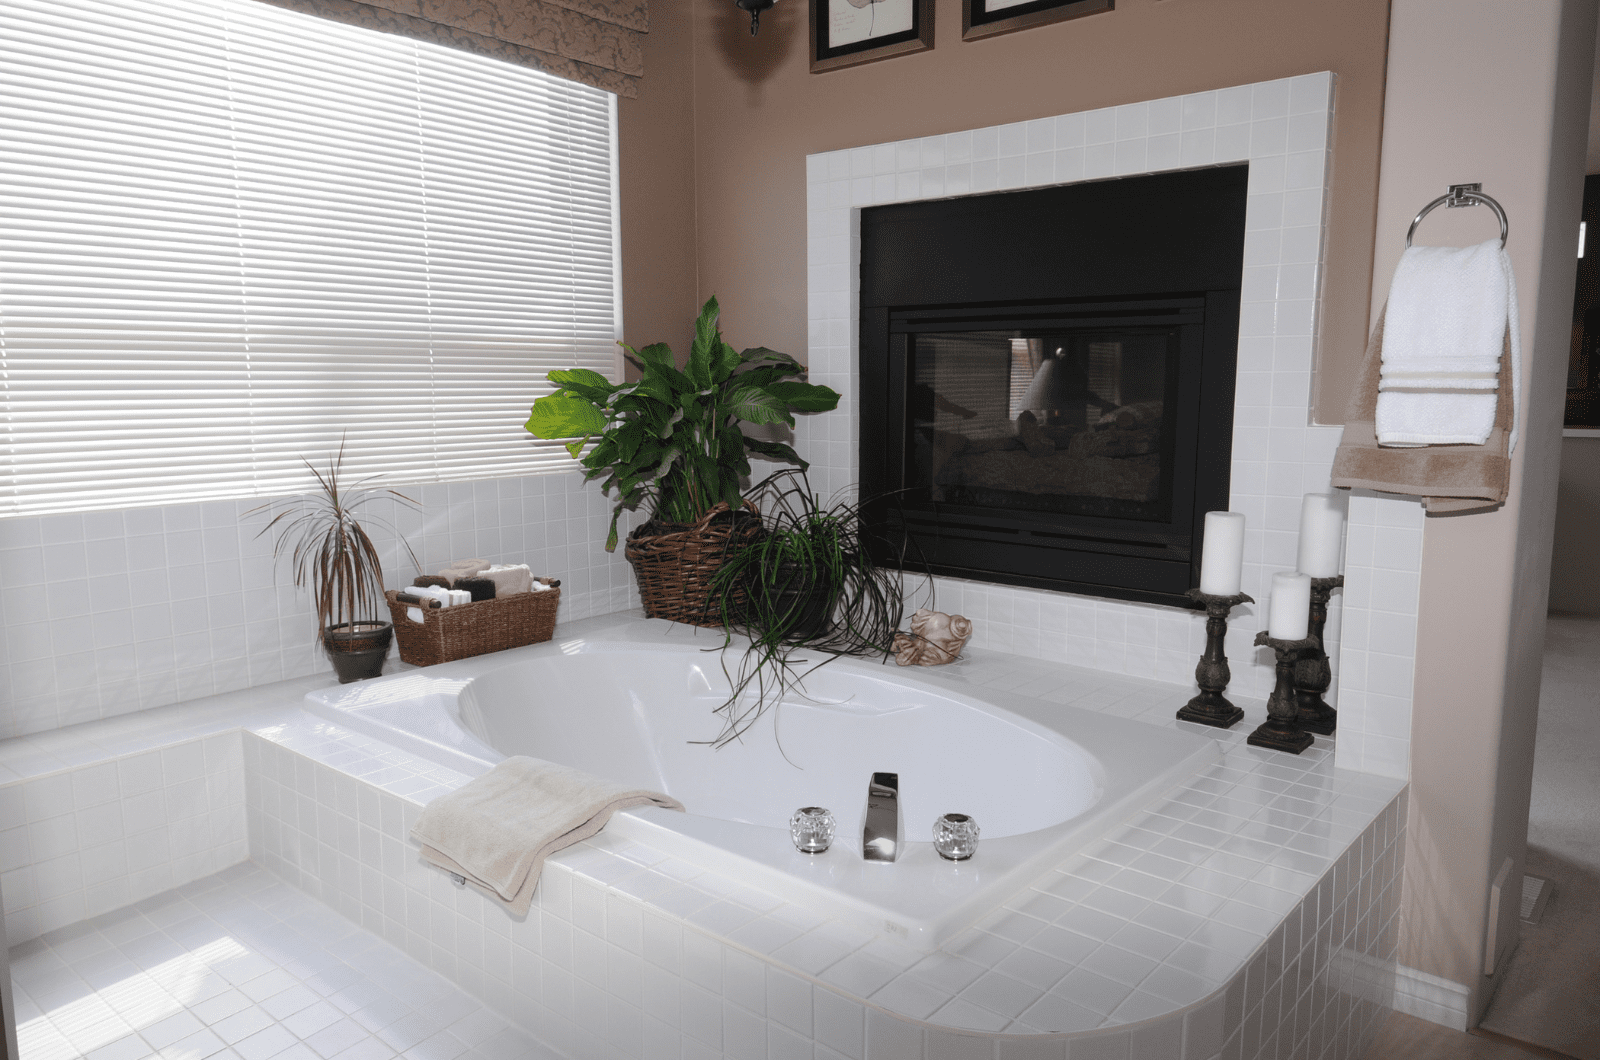 Fireplace next to a tub in a bathroom.